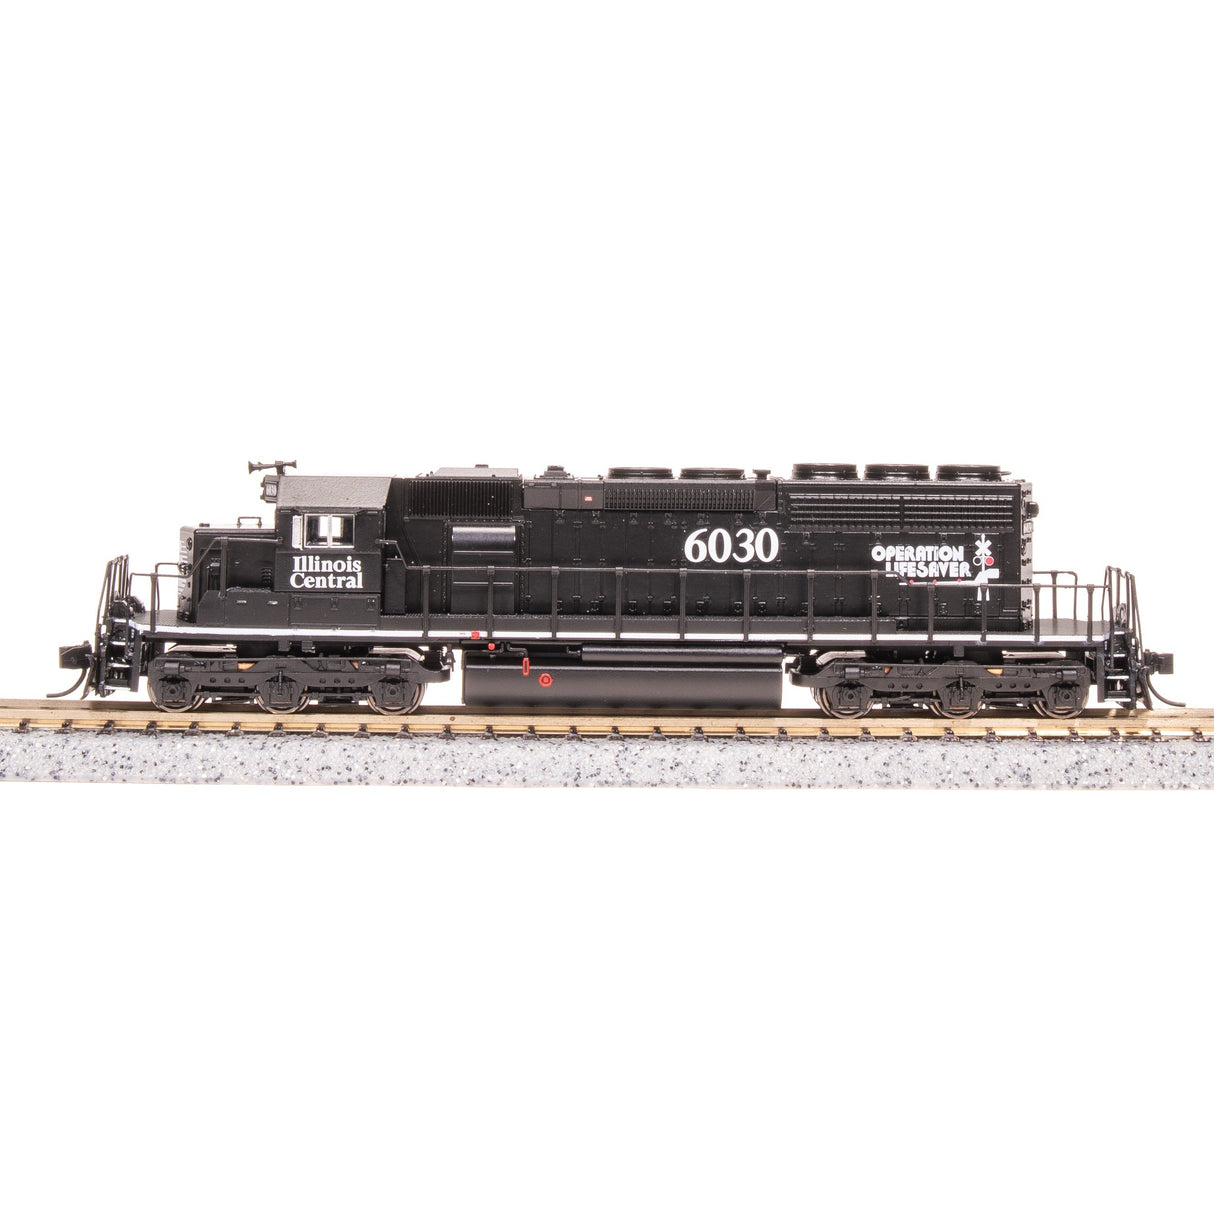 Broadway Limited N Scale SD40-2 Diesel IC #6030/Operation Lifesaver DC/DCC Sound